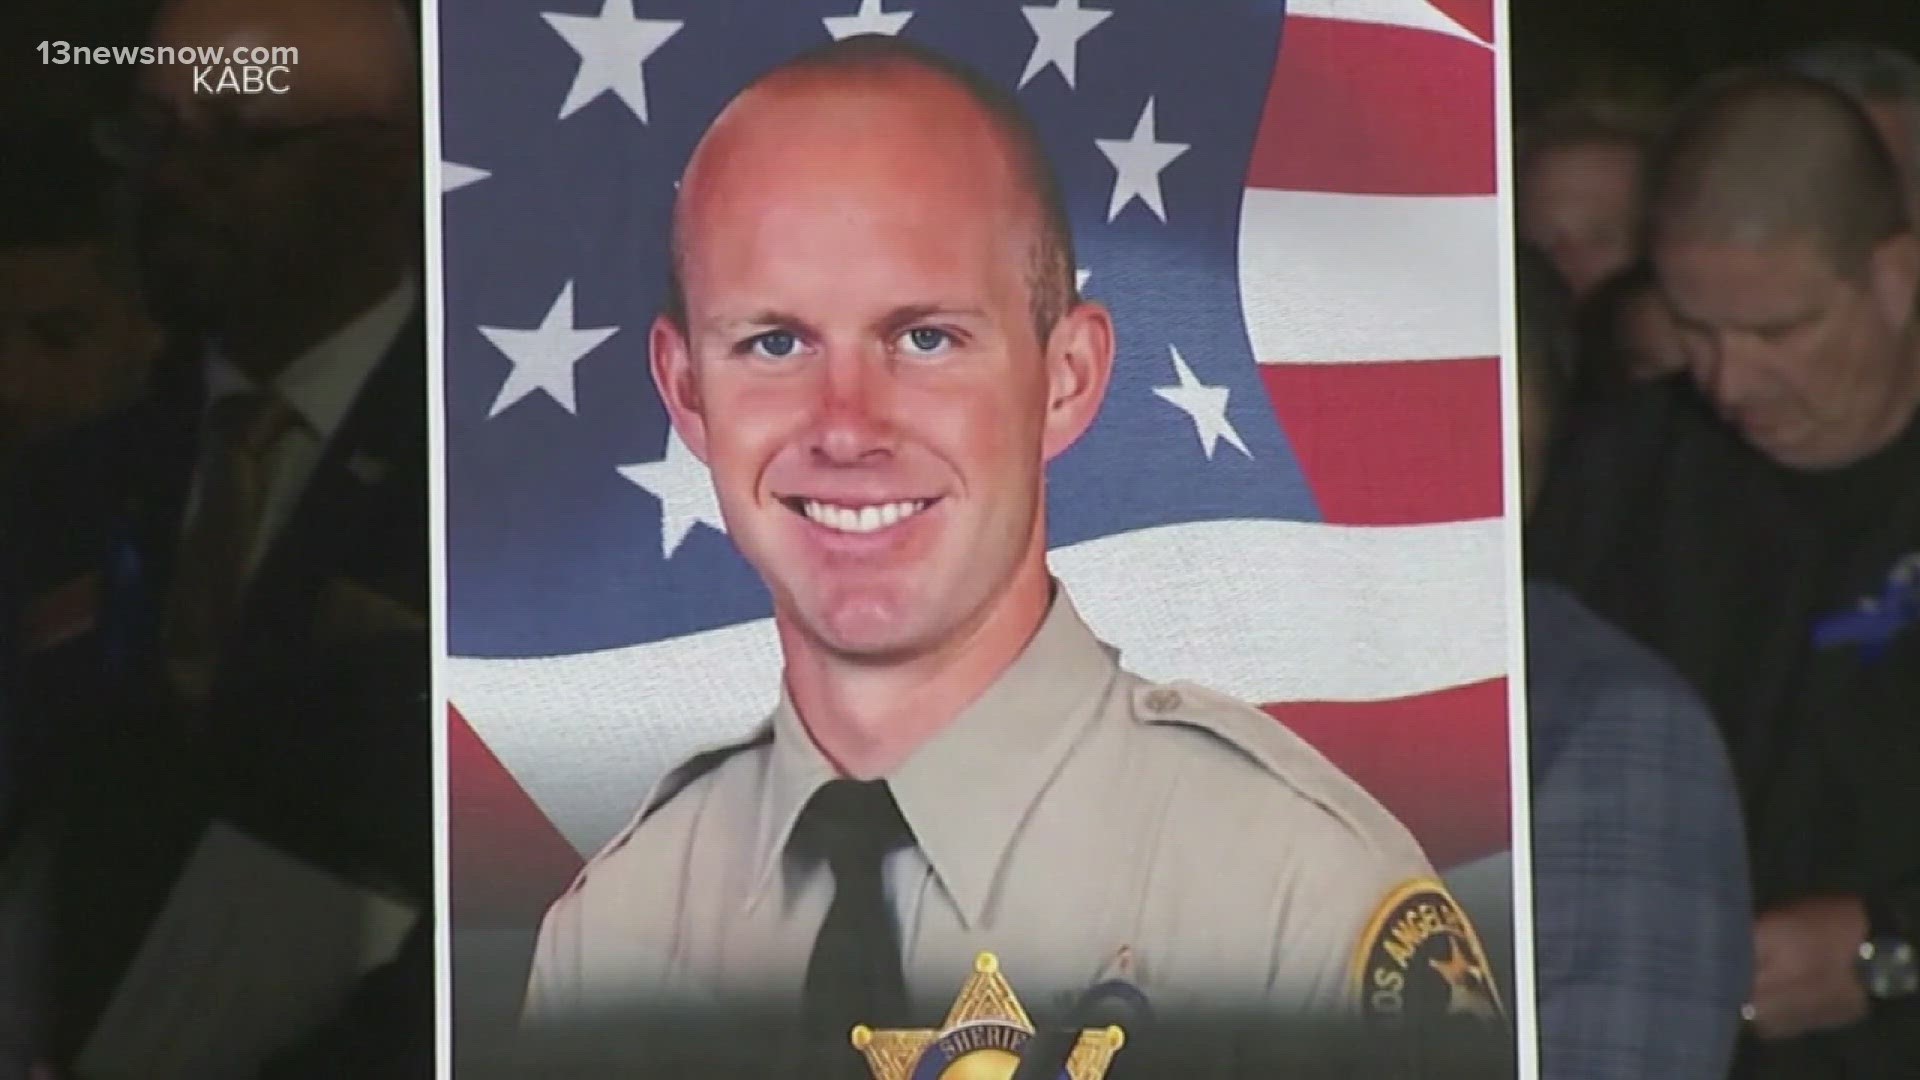 Deputy Ryan Clinkunbroomer died at 30 after a "targeted attack" while he was sitting at a red light. There's a $250,000 reward for information leading to his killer.